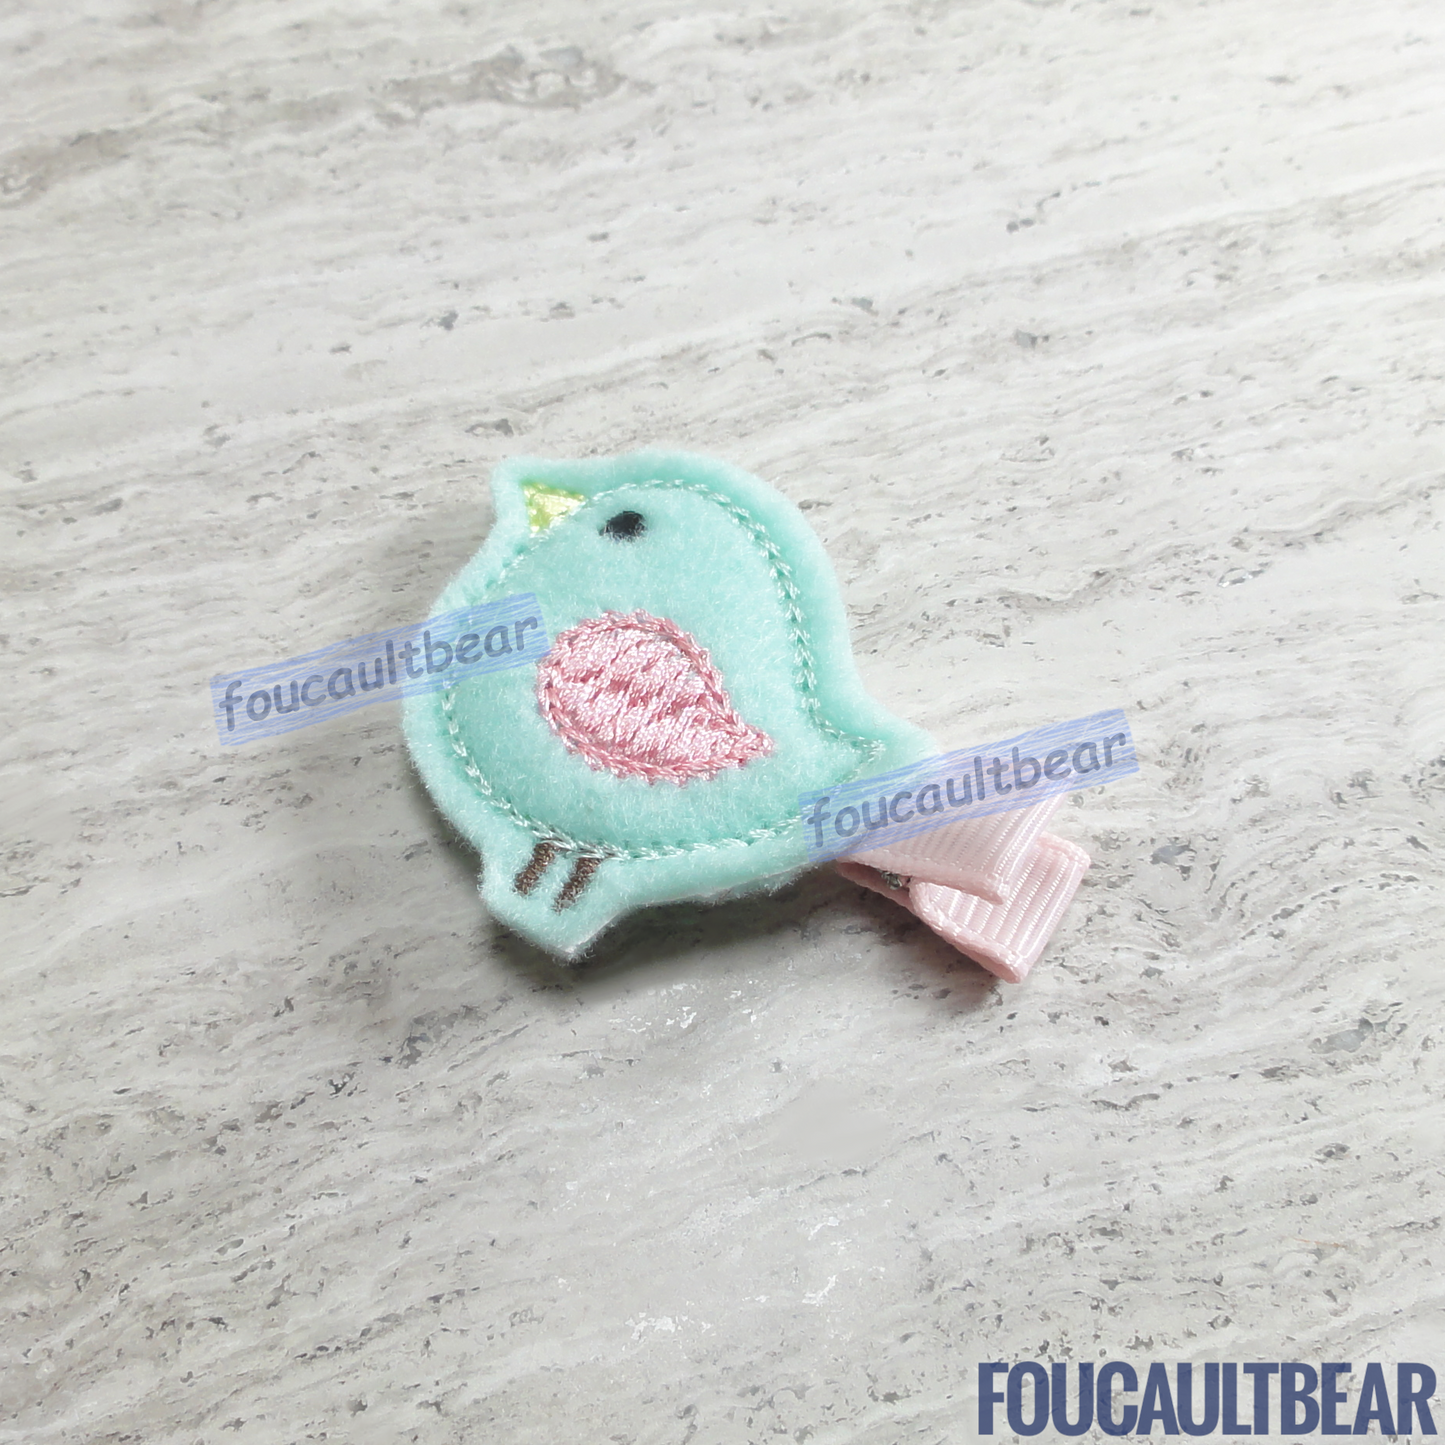 Foucaultbear's HANDMADE HAIR CLIPPIE. Pastel Songbird. Embroidered Soft Felt. Partially Lined Alligator Hair Clip. Super Cute Pastel Songbird Hair Clippie. A nice addition to your little girl's wardrobe. Perfect for toddlers, preschoolers, elementary-schoolers. Absolutely adorable on babies with enough hair to wear it too. Makes for a great baby Shower gift. Definitely not your standard cliché shower gift. Why not be the first to introduce variety to the baby's otherwise boring wardrobe? 